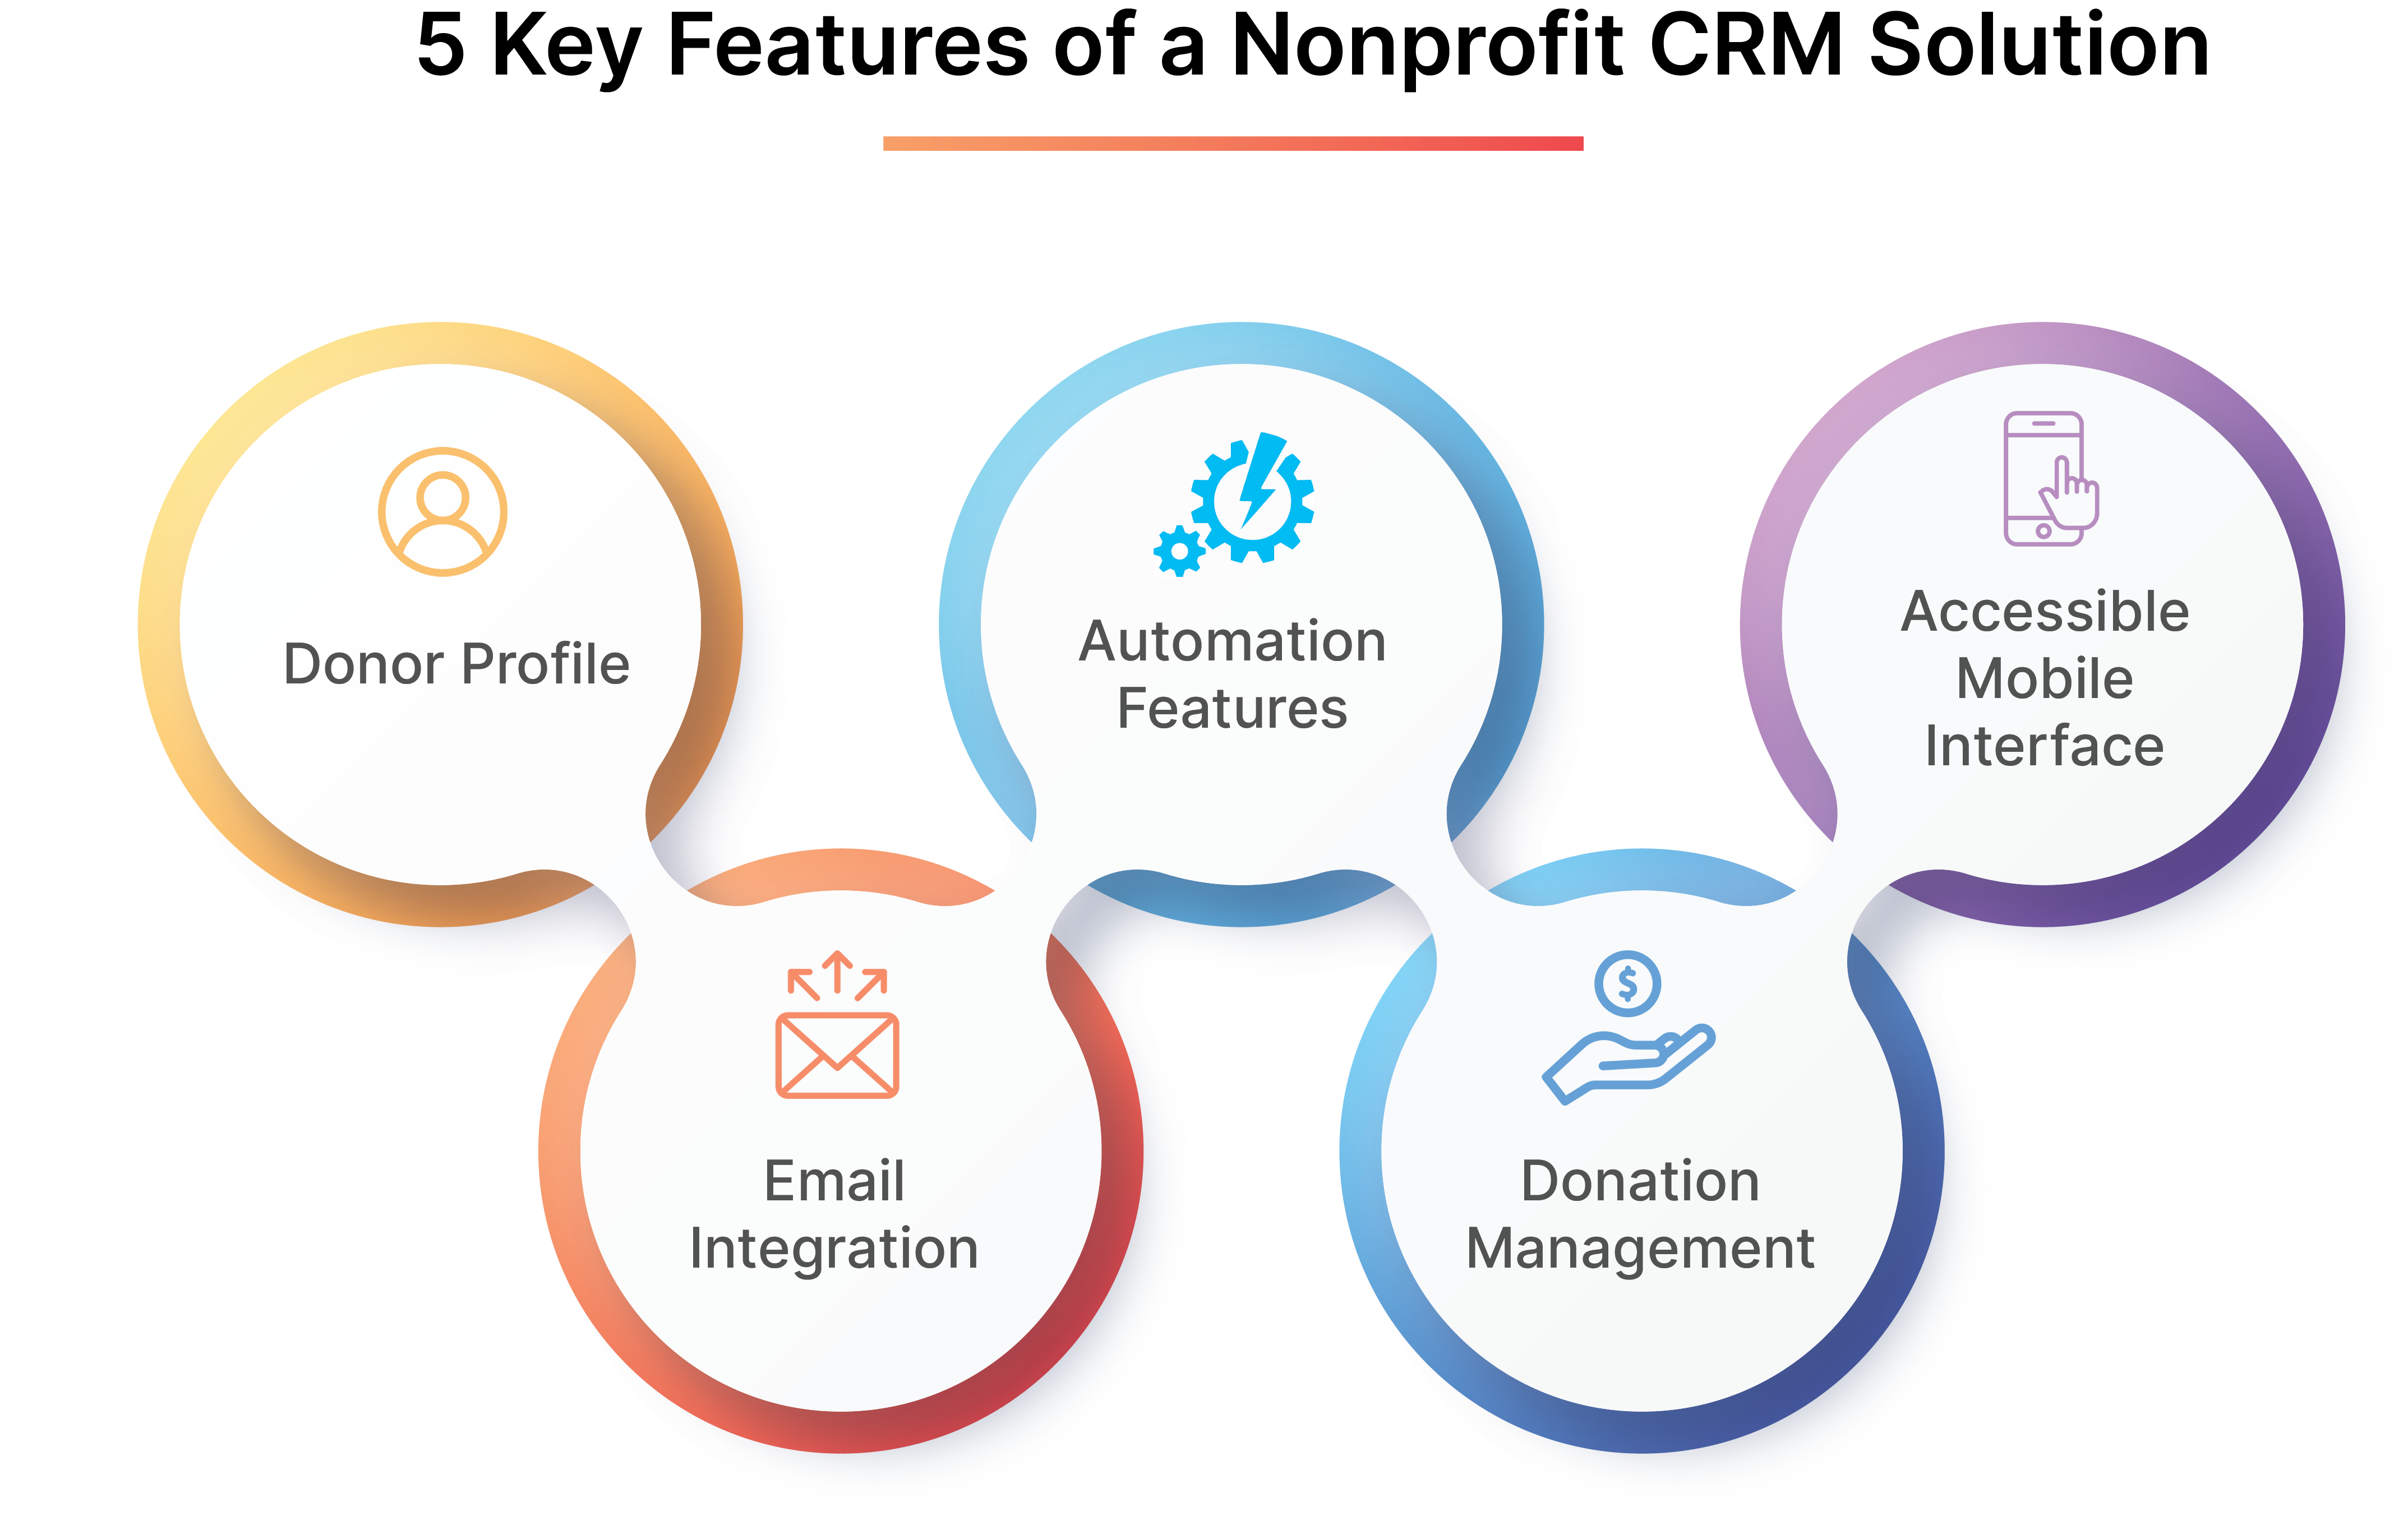 Key Features of a Nonprofit CRM Solution